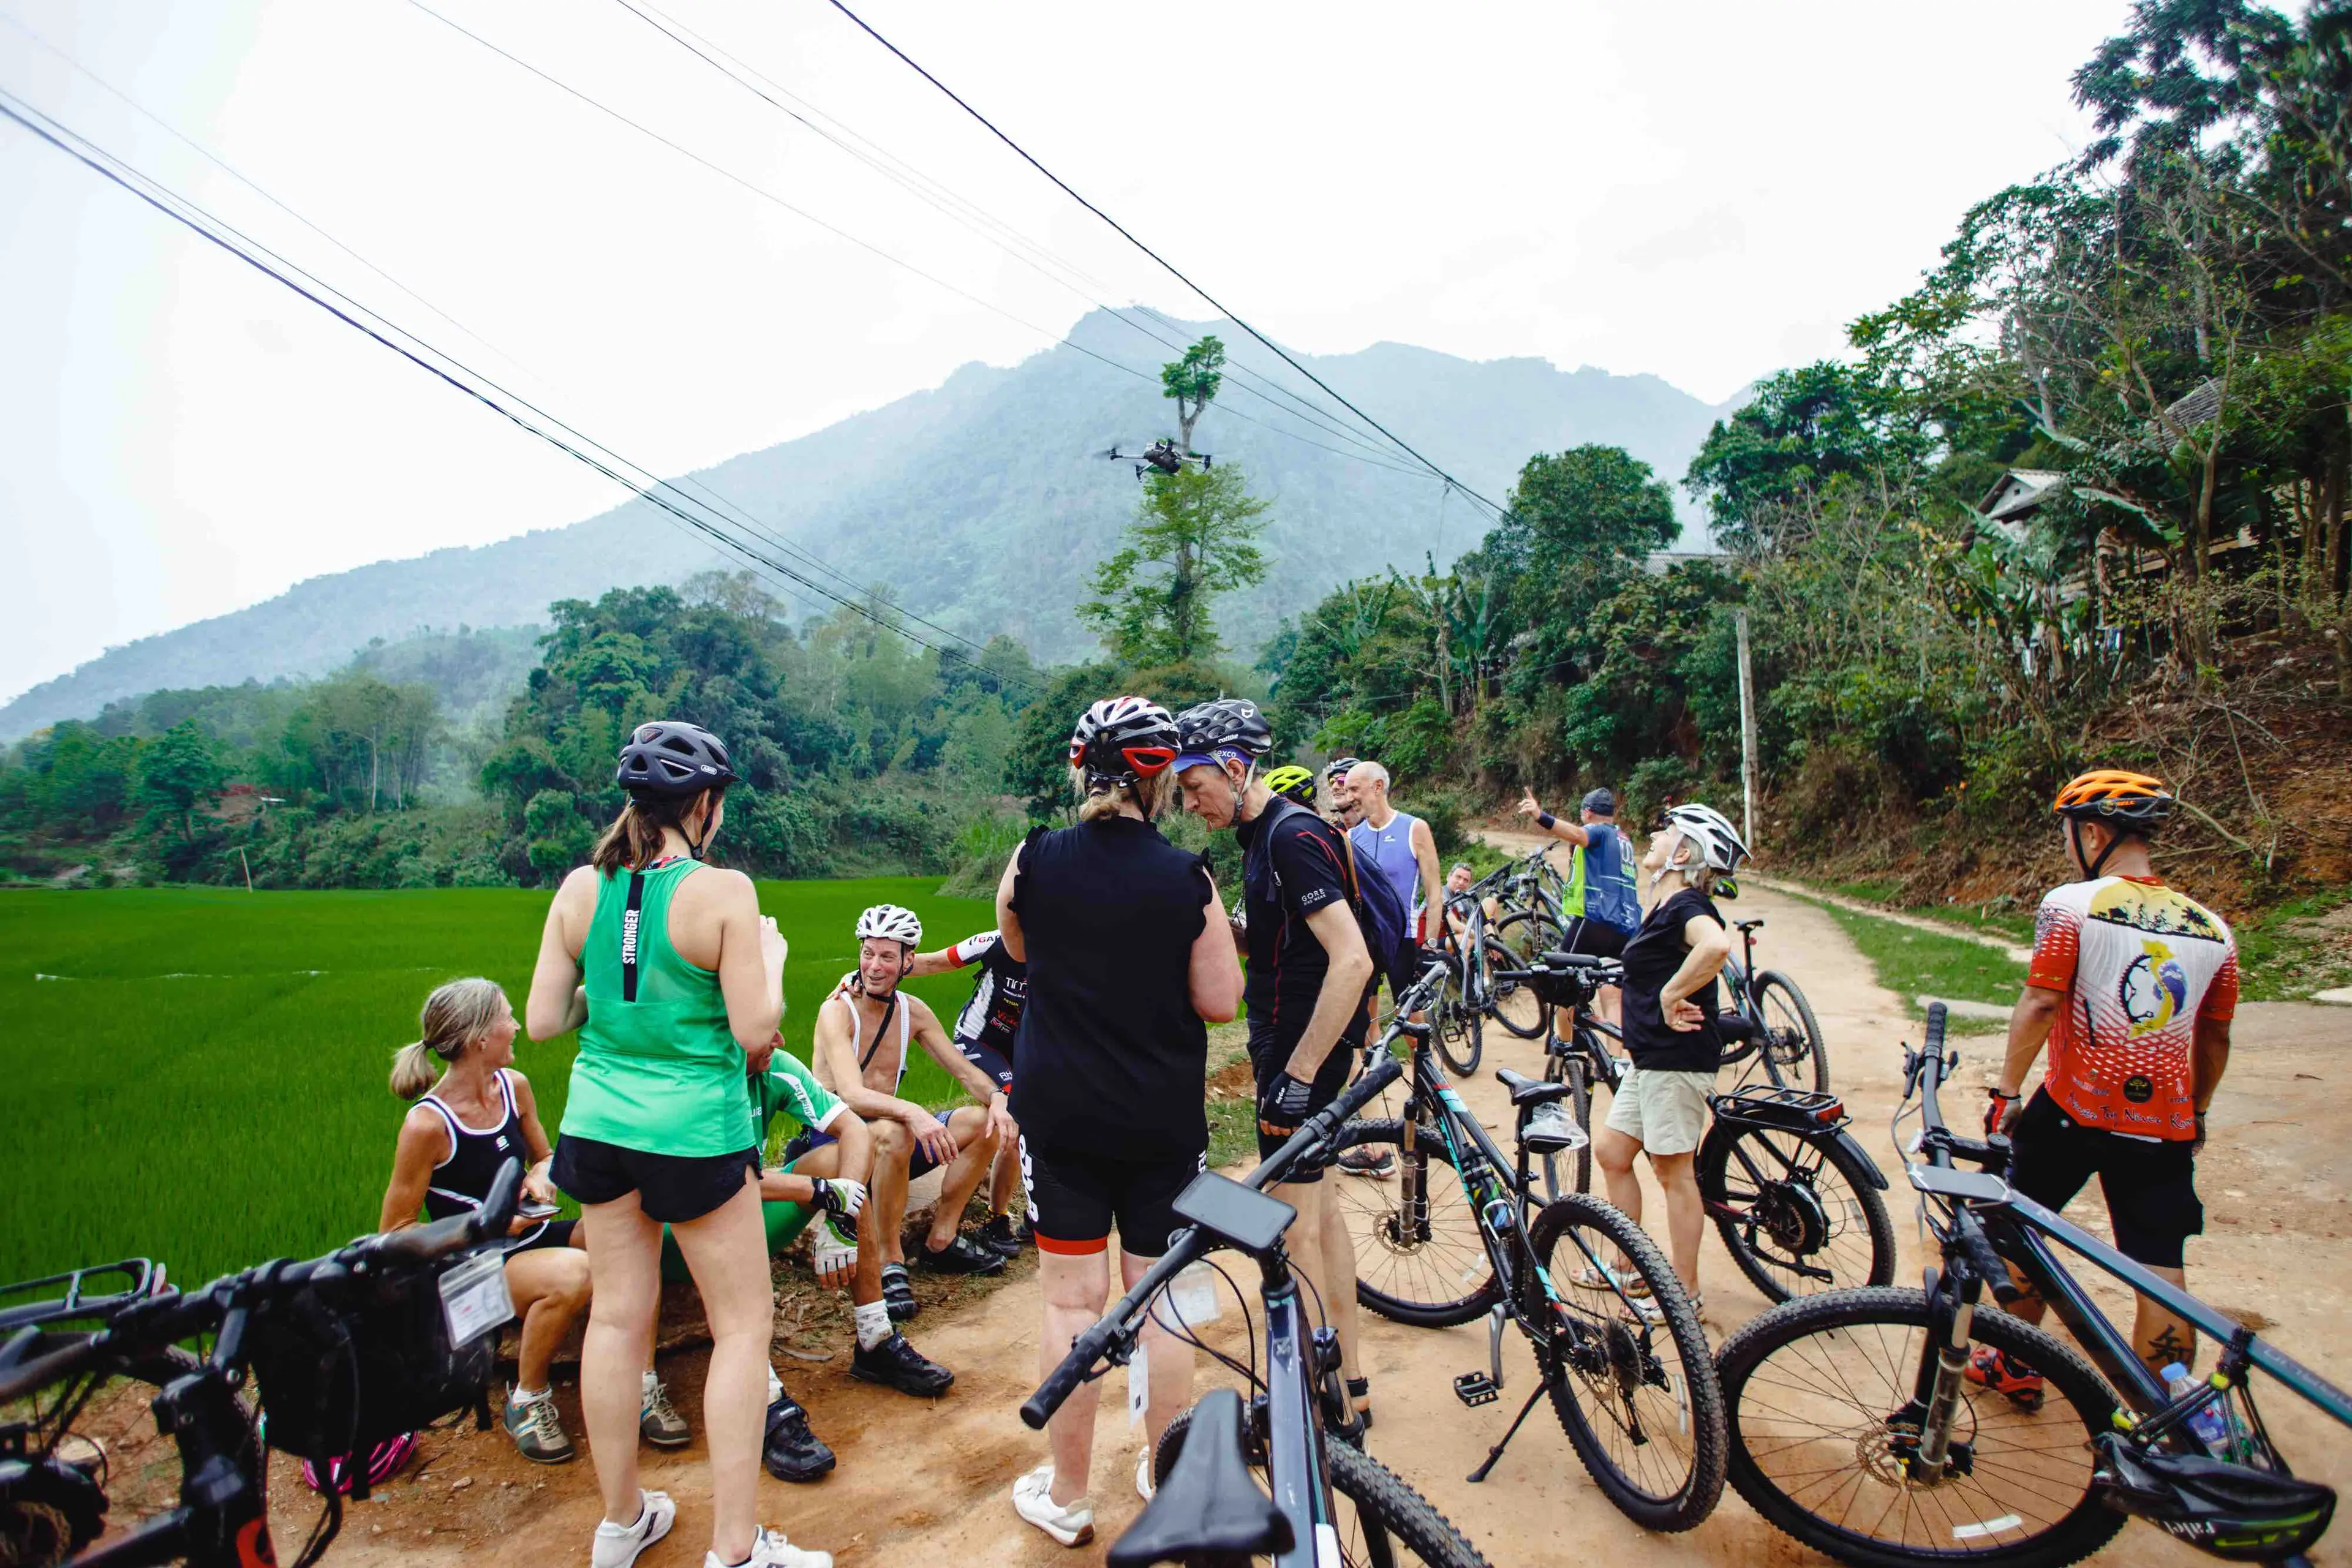 On our Northern Vietnam Trip might be a bit challenging - but we got you cover all of it